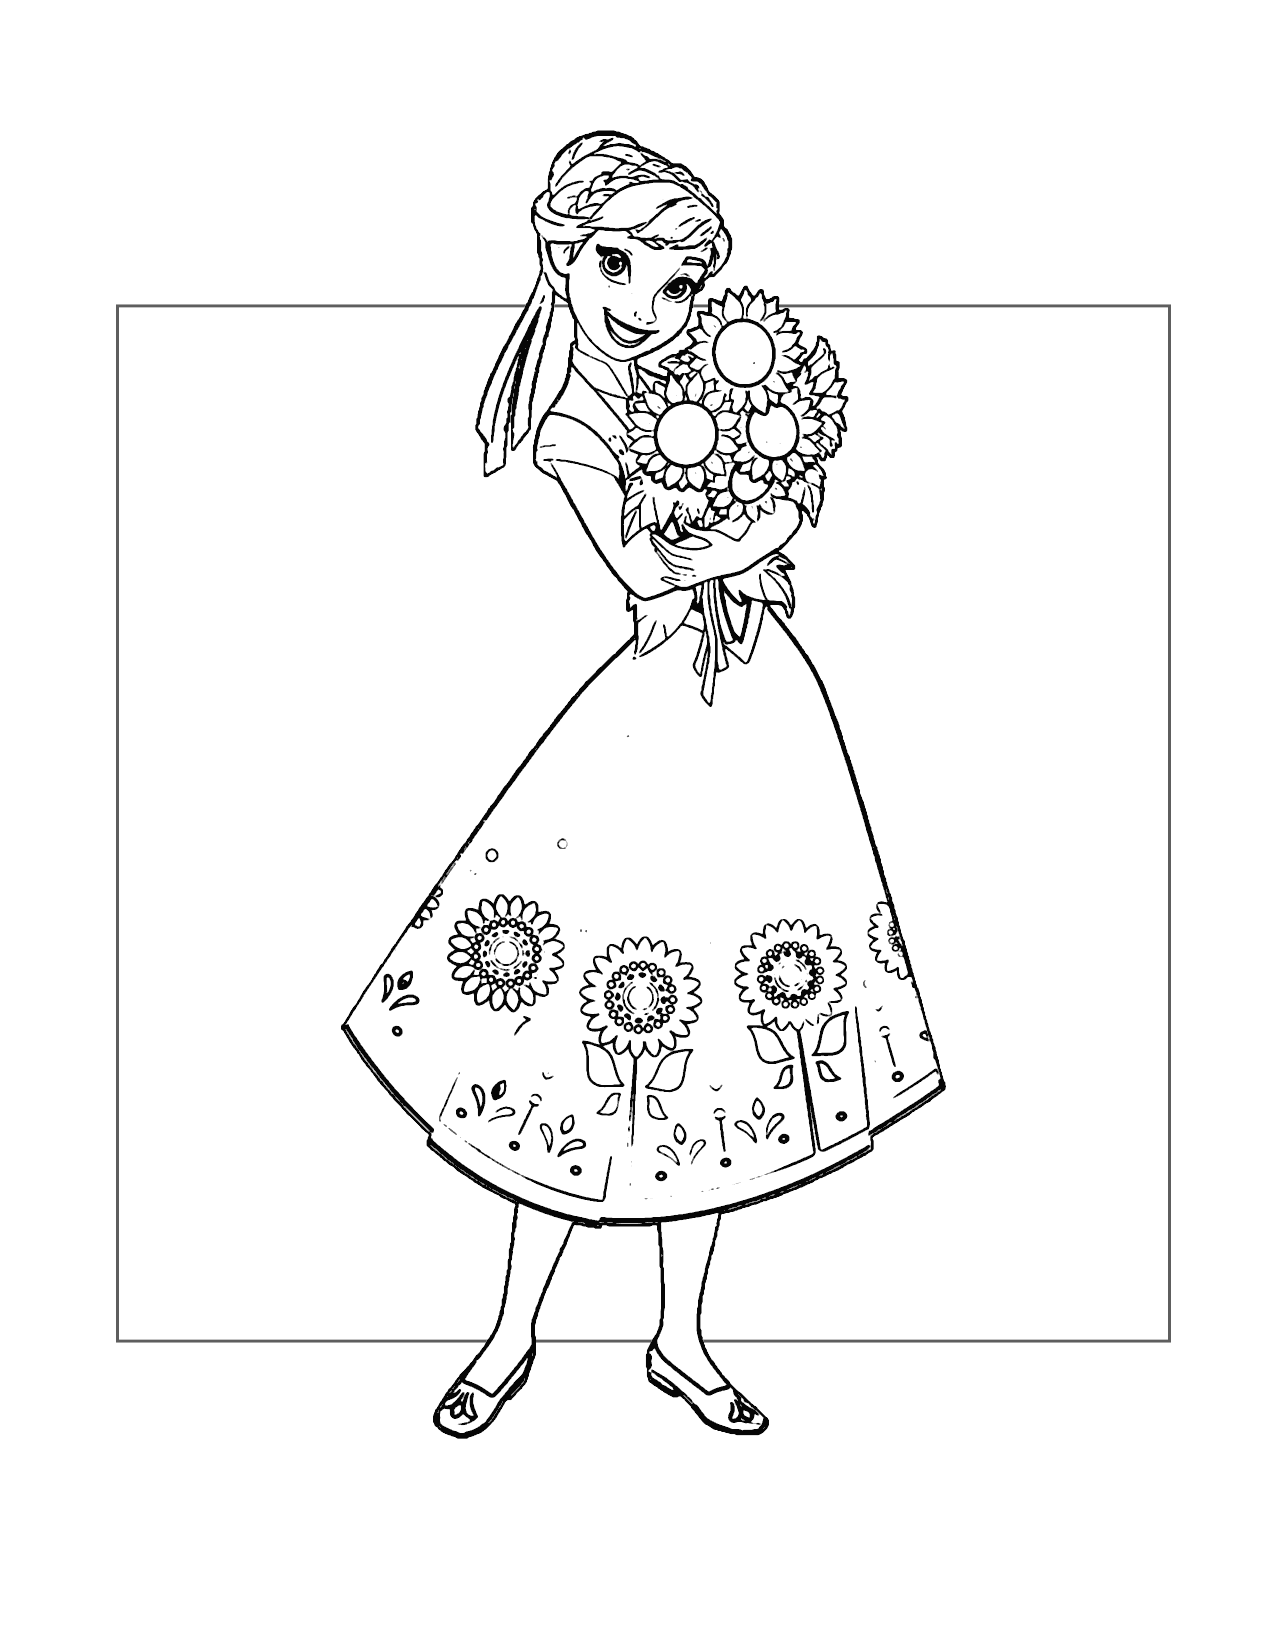 Anna Picks Flowers Coloring Page